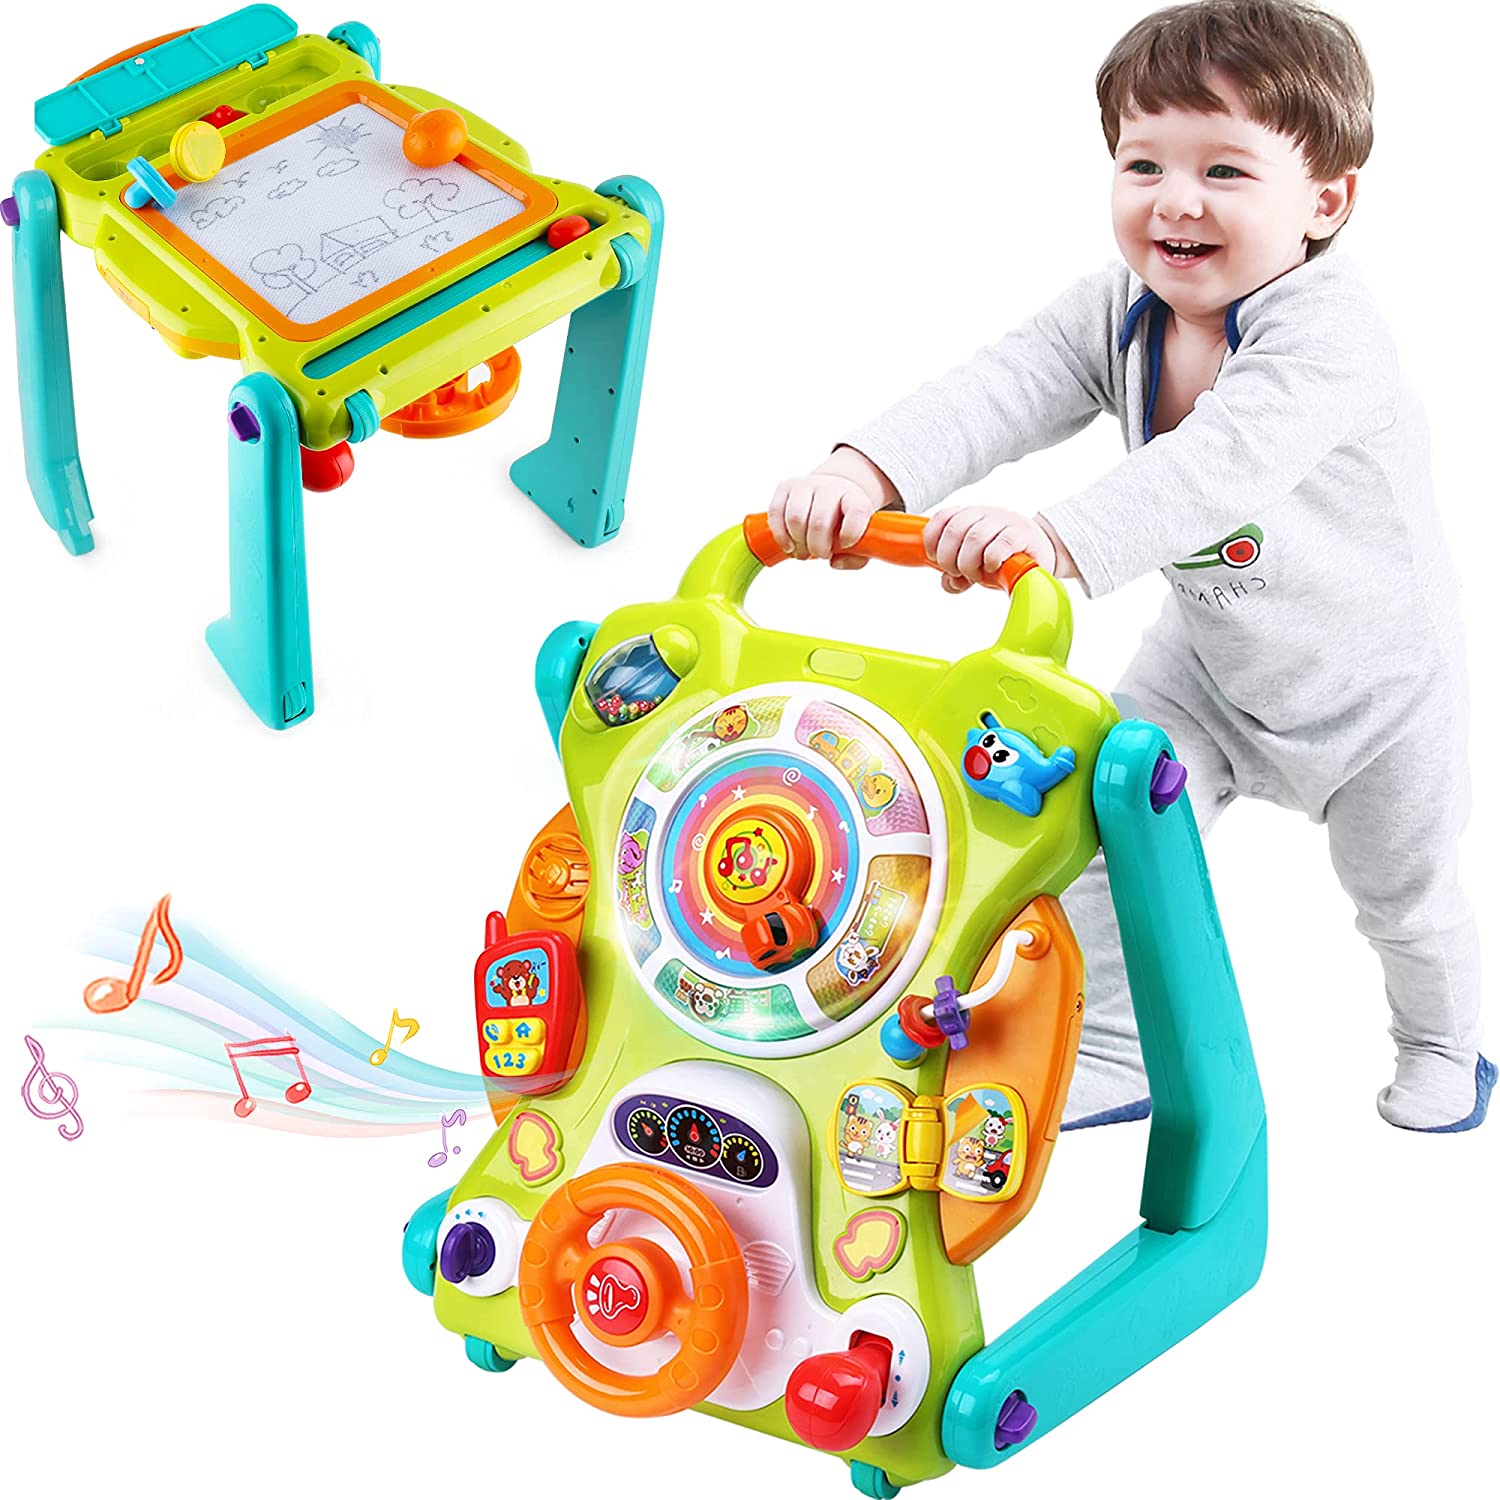 iPlay, iLearn Stable East Grasp Sit-To-Stand Toy